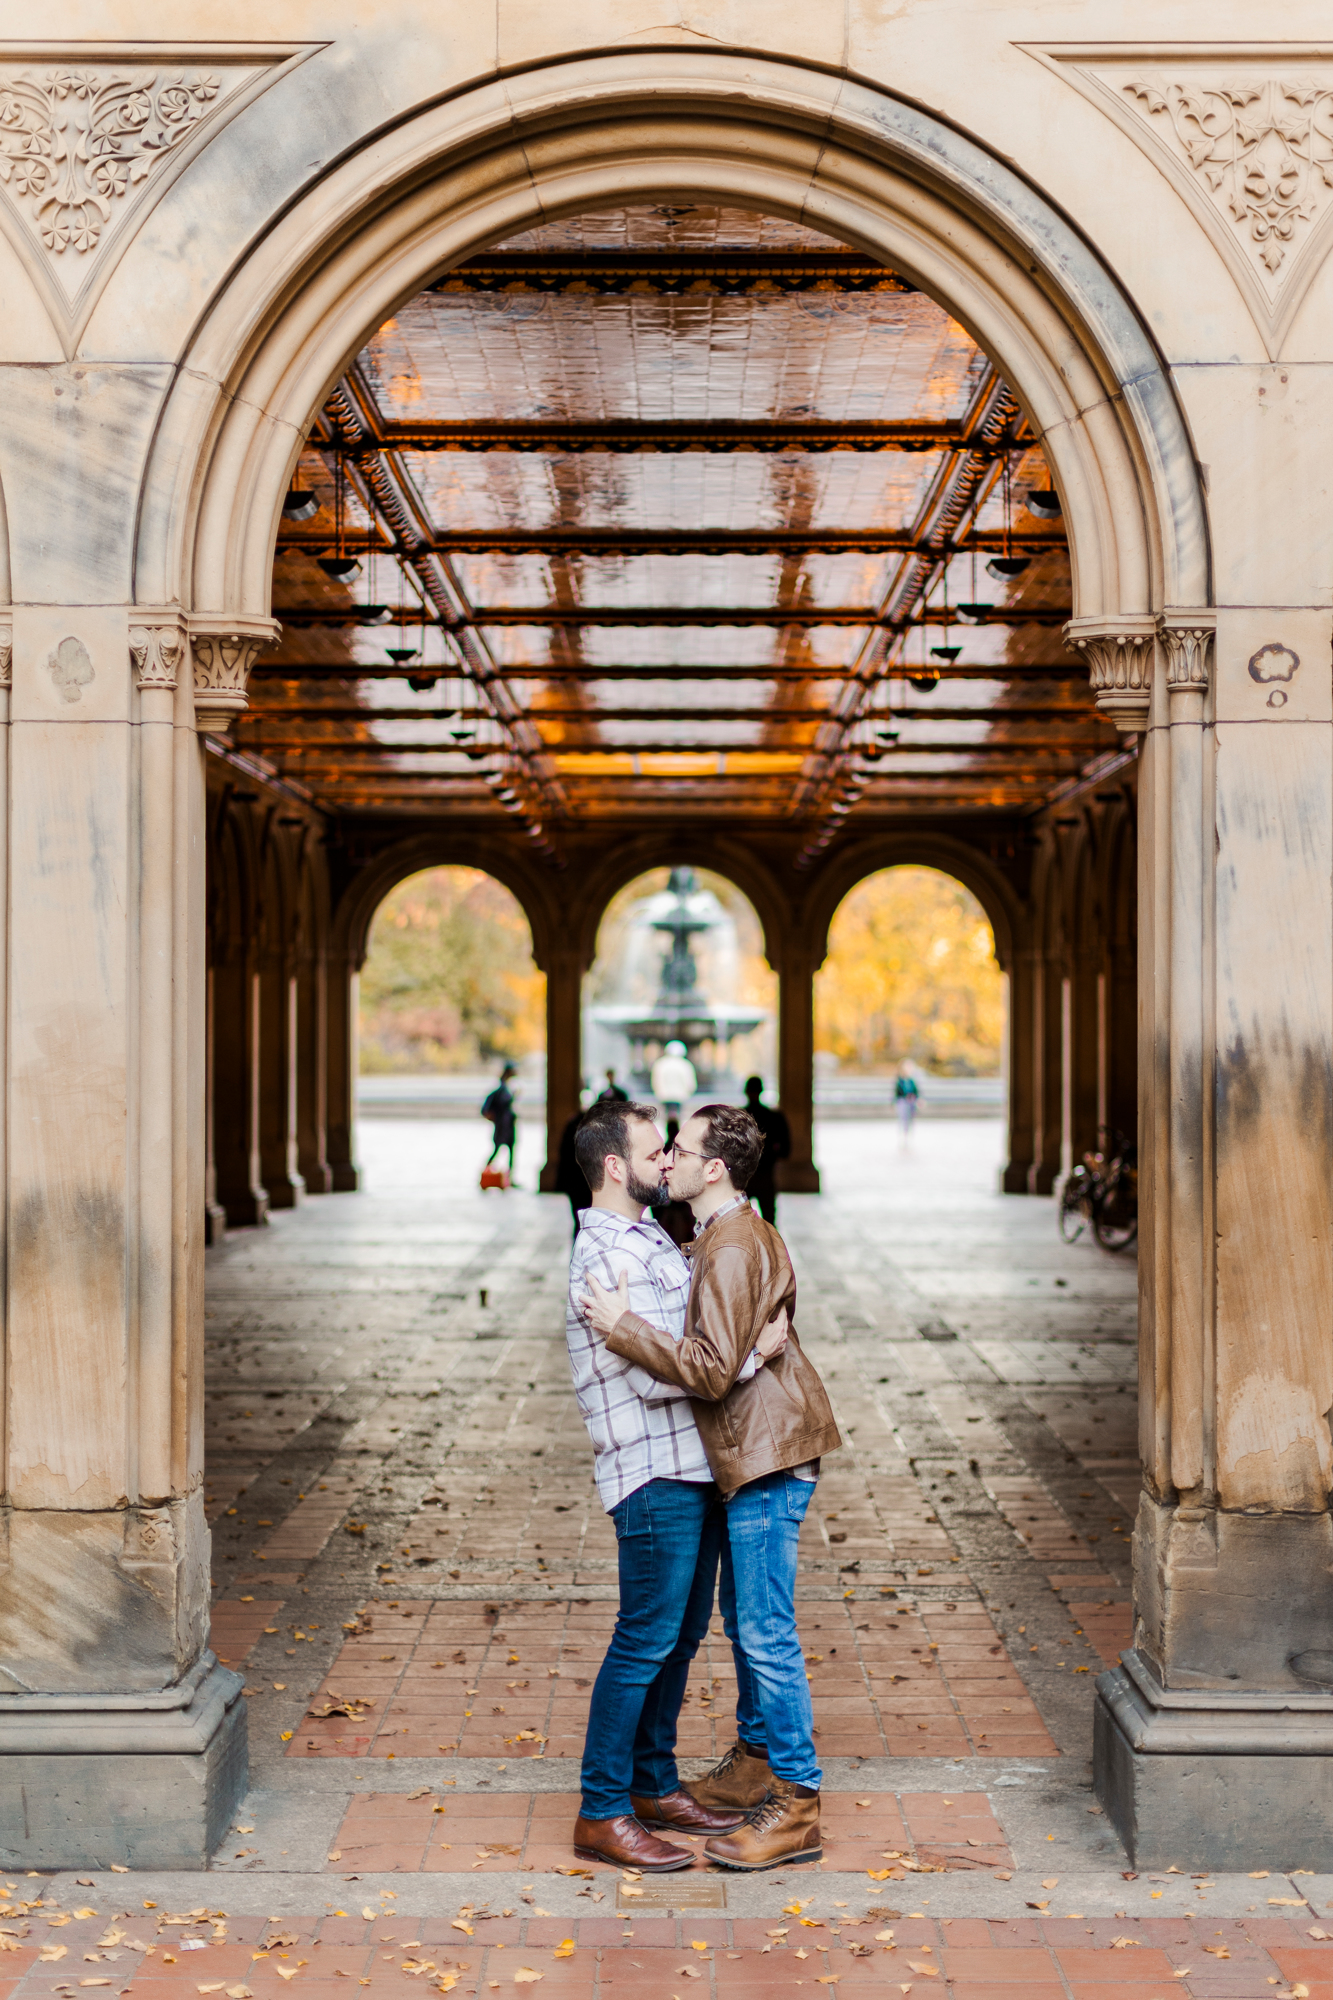 Striking Engagement Photo Shoot in Central Park